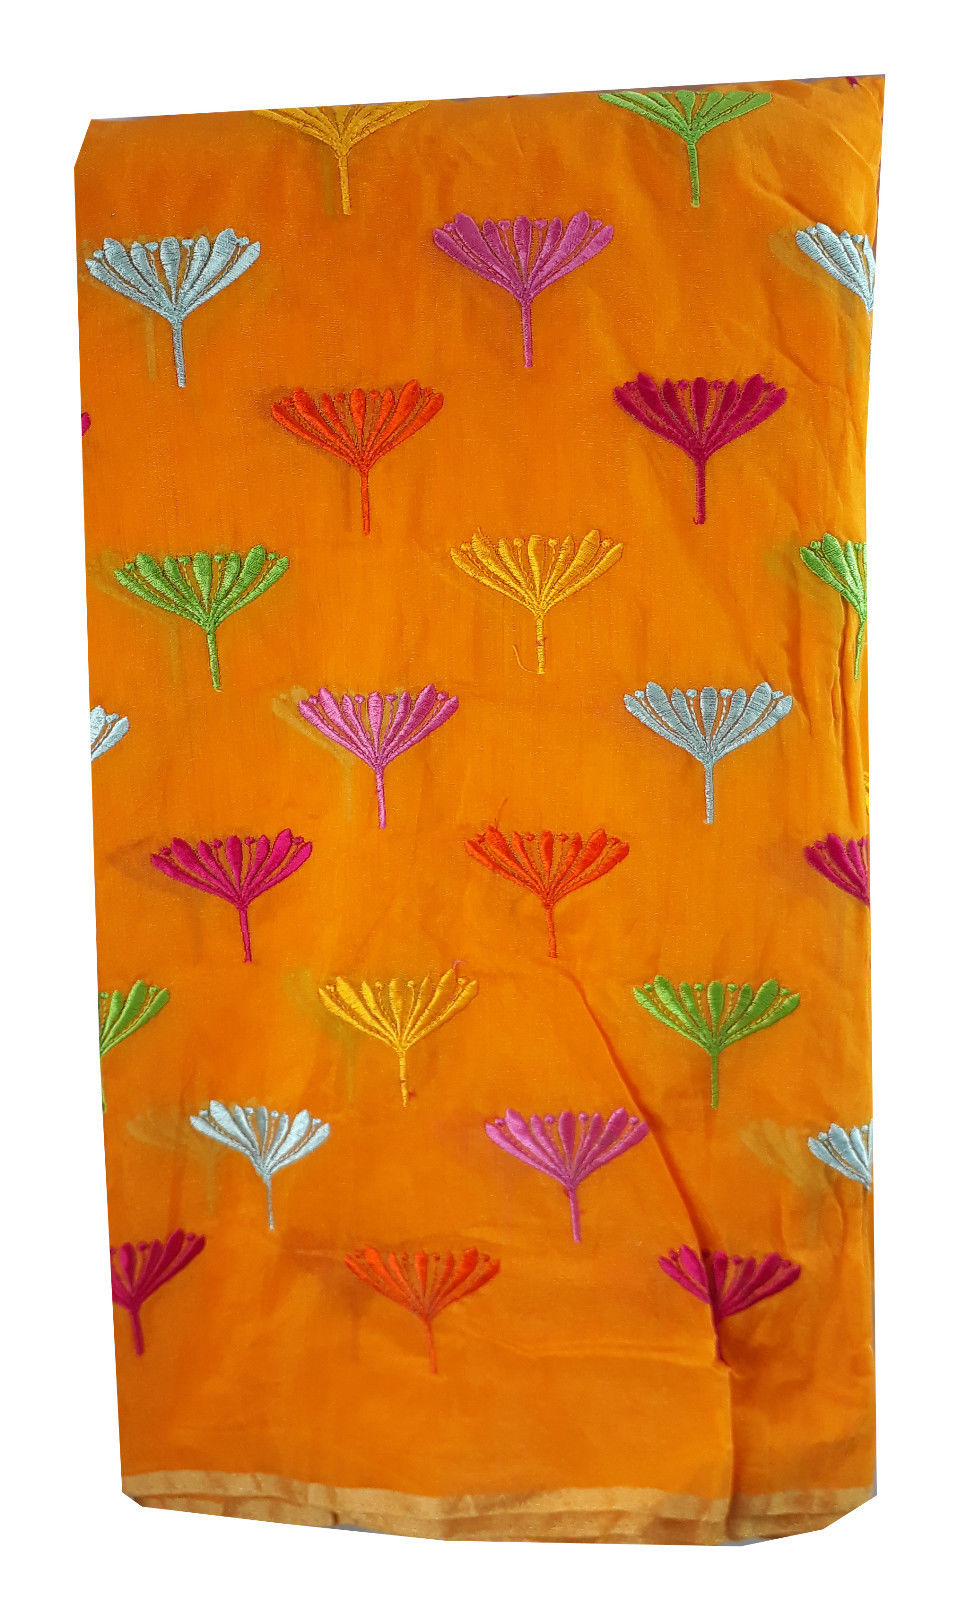 buy embroidered fabric online india online fabric store india Embroidery Chanderi Cotton Orange 43 inches Wide ange